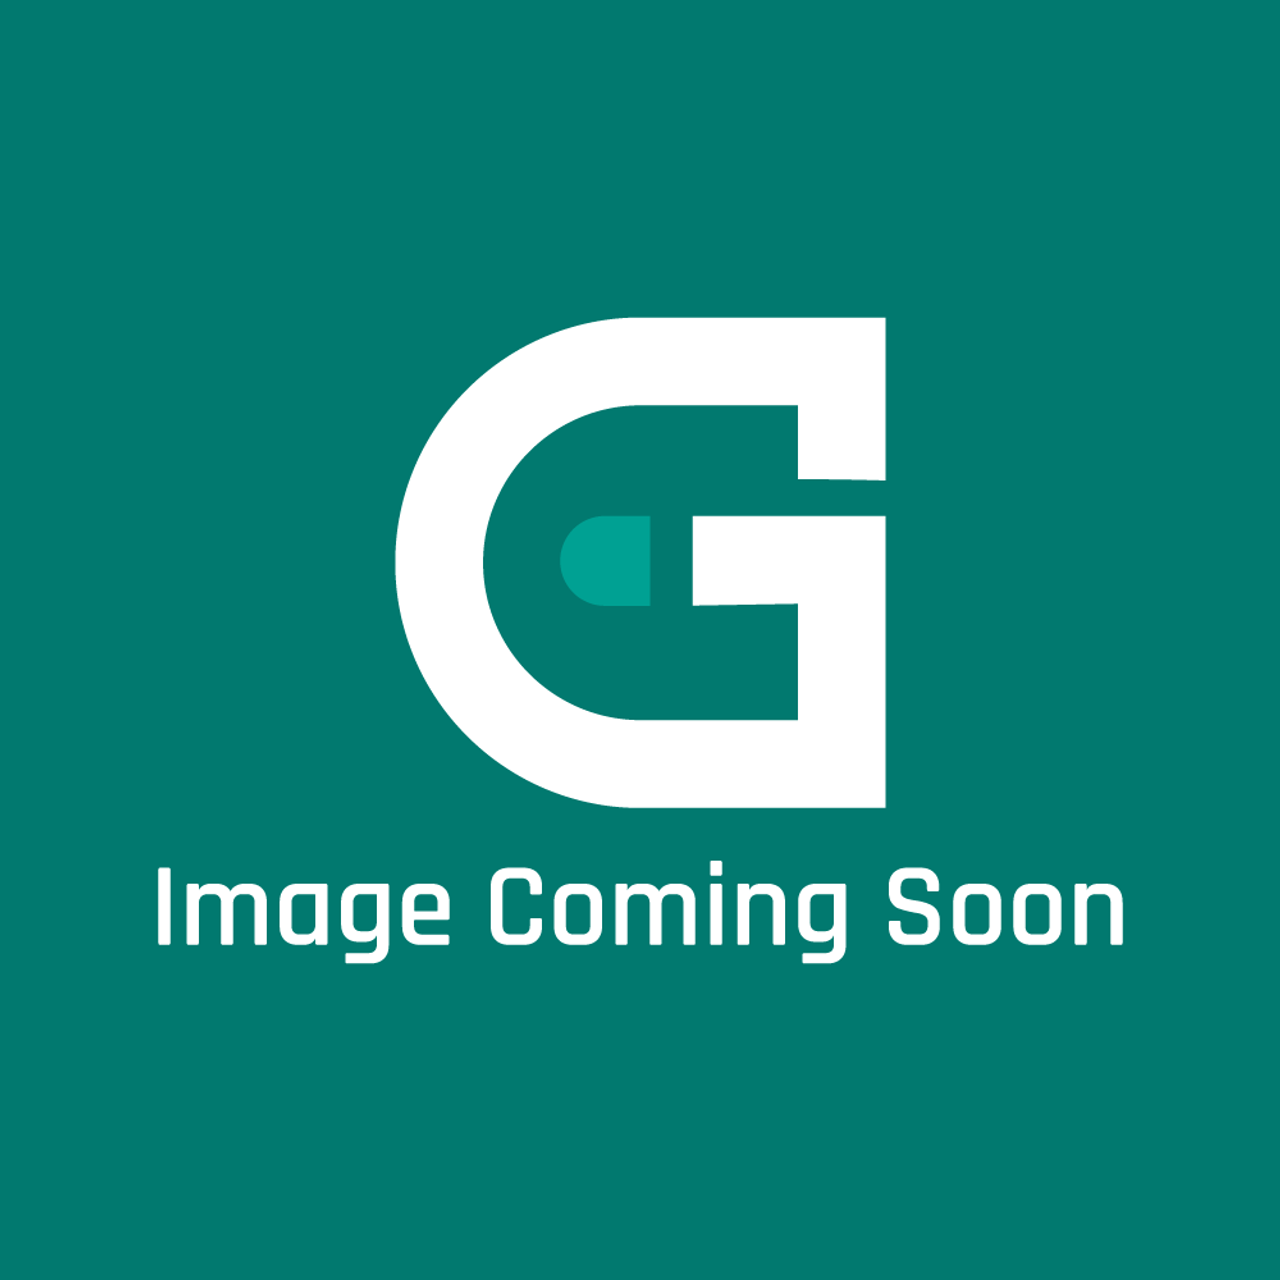 Frigidaire - Electrolux 5304432172 Pan - Image Coming Soon!